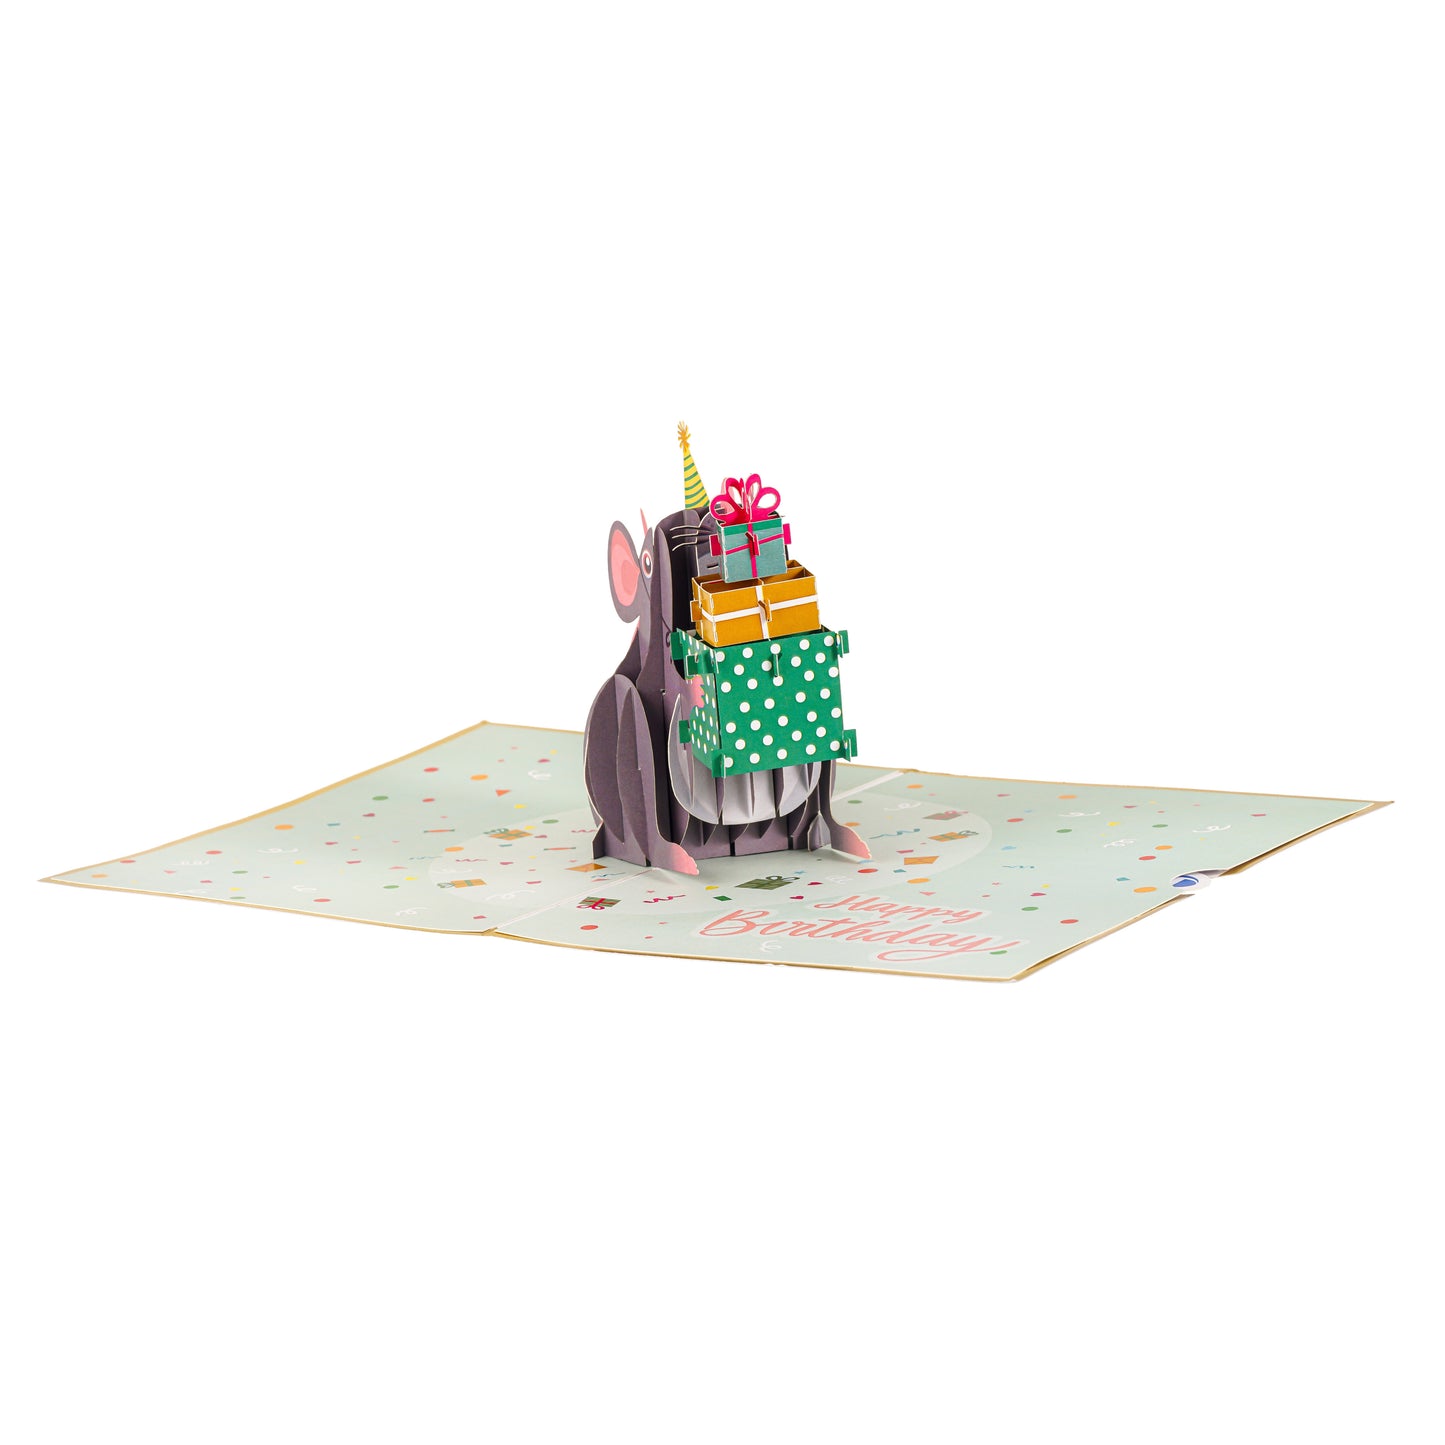 Mouse Hold Gift Box Birthday Card